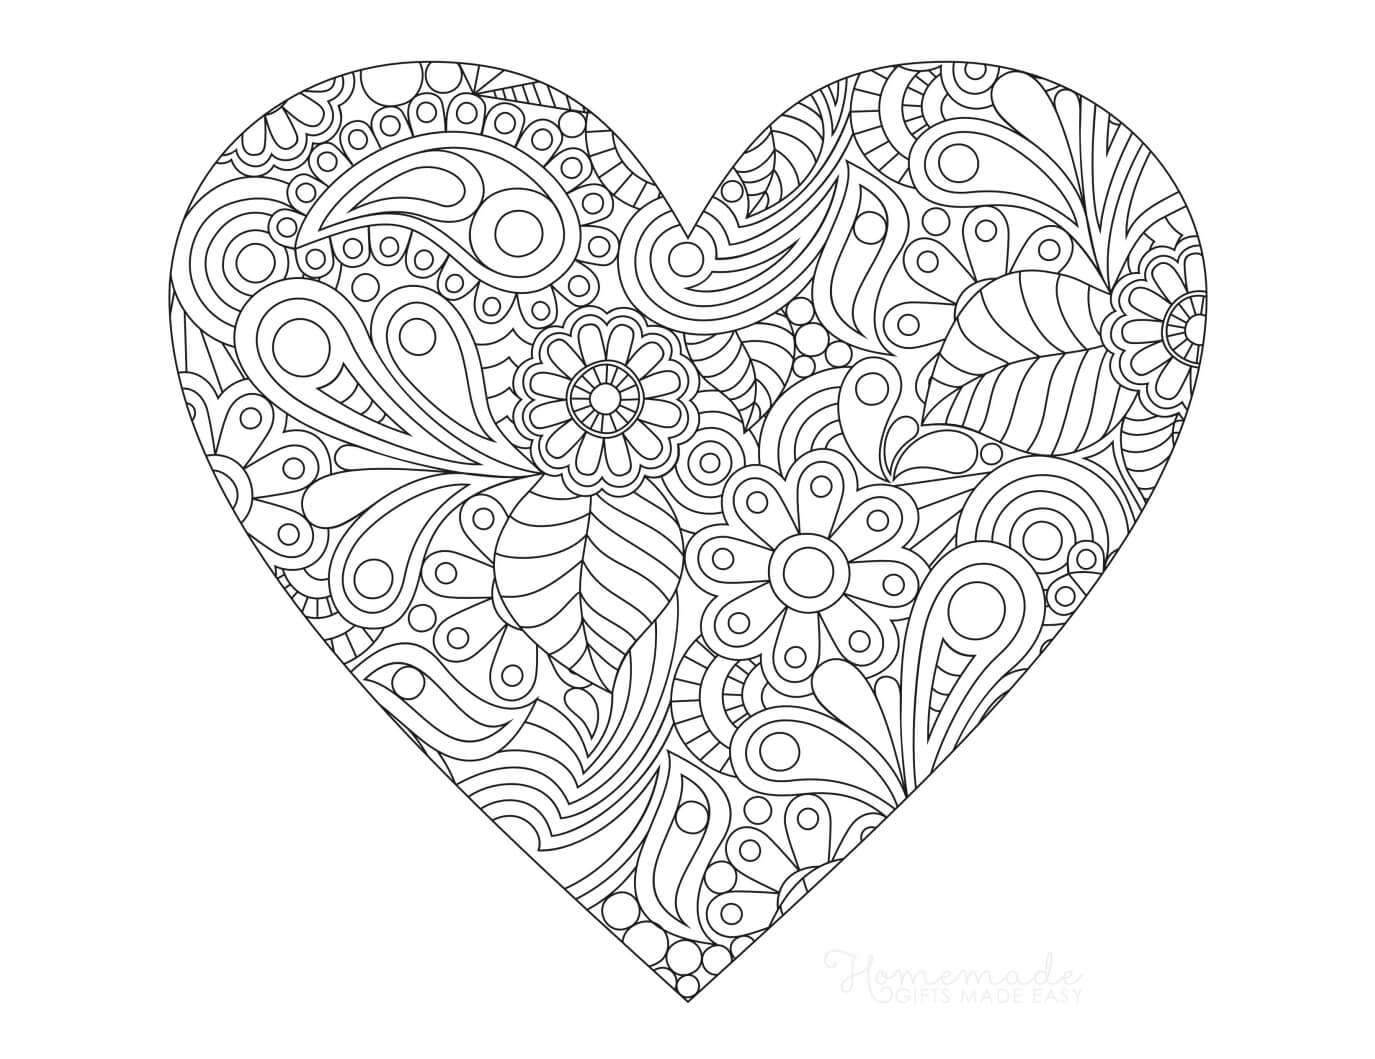 48 Printable Heart Coloring Pages for Adults - Happier Human